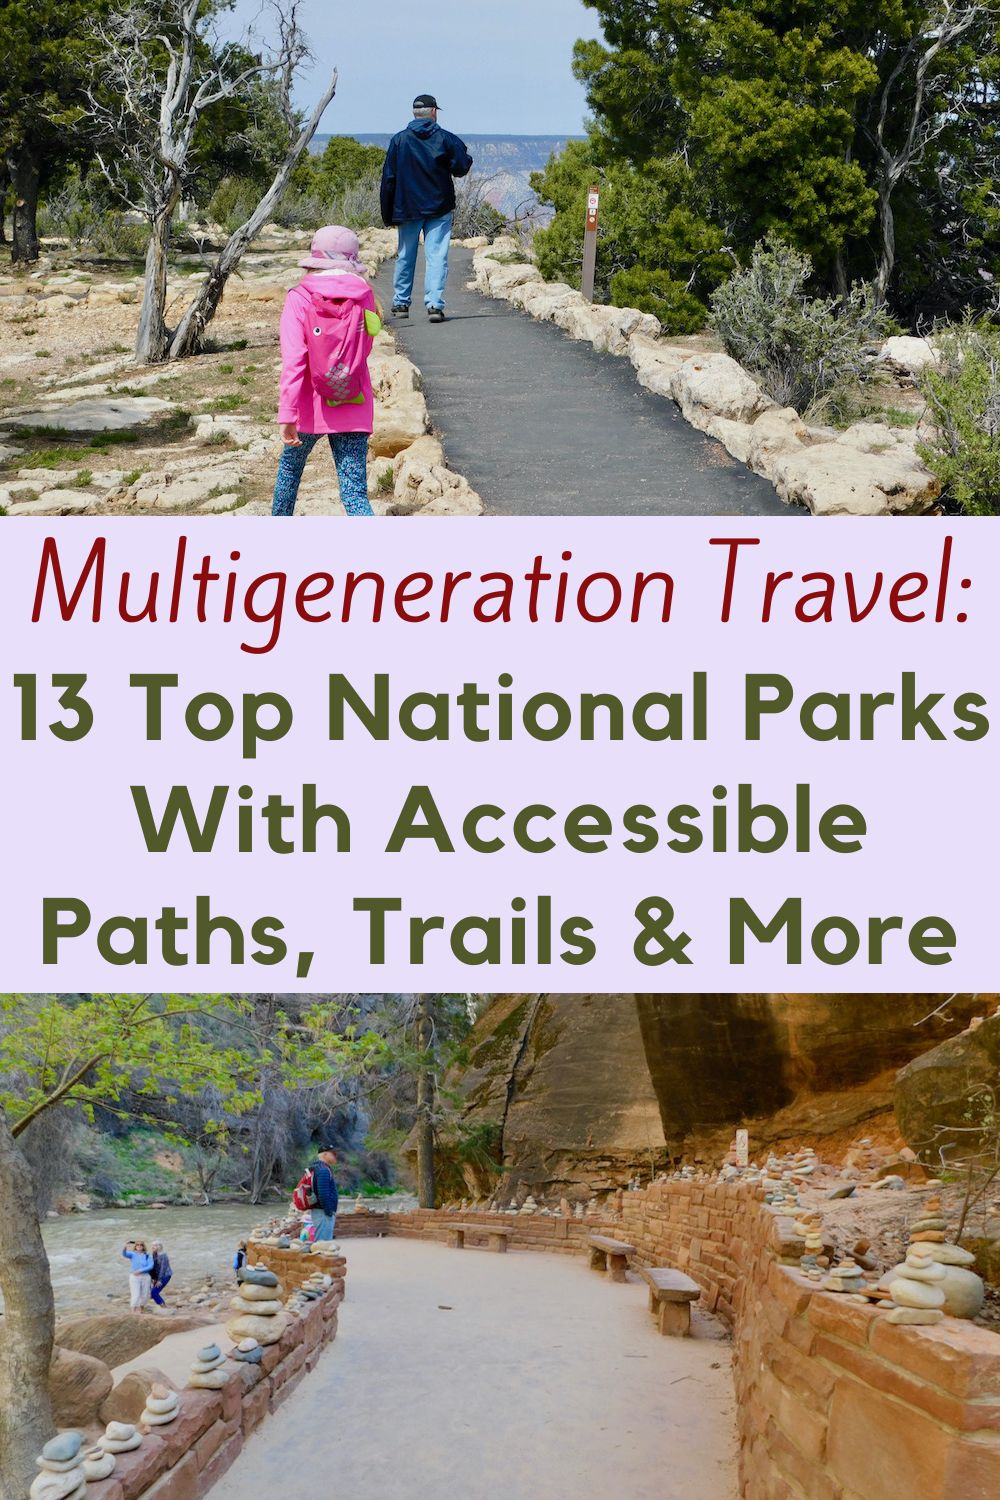 multigeneration families appreciate accessible trails, parking and scenic drives in national parks for many reasons from needing wheelchairs to wanting strollers along. here are 13 parks that deliver.